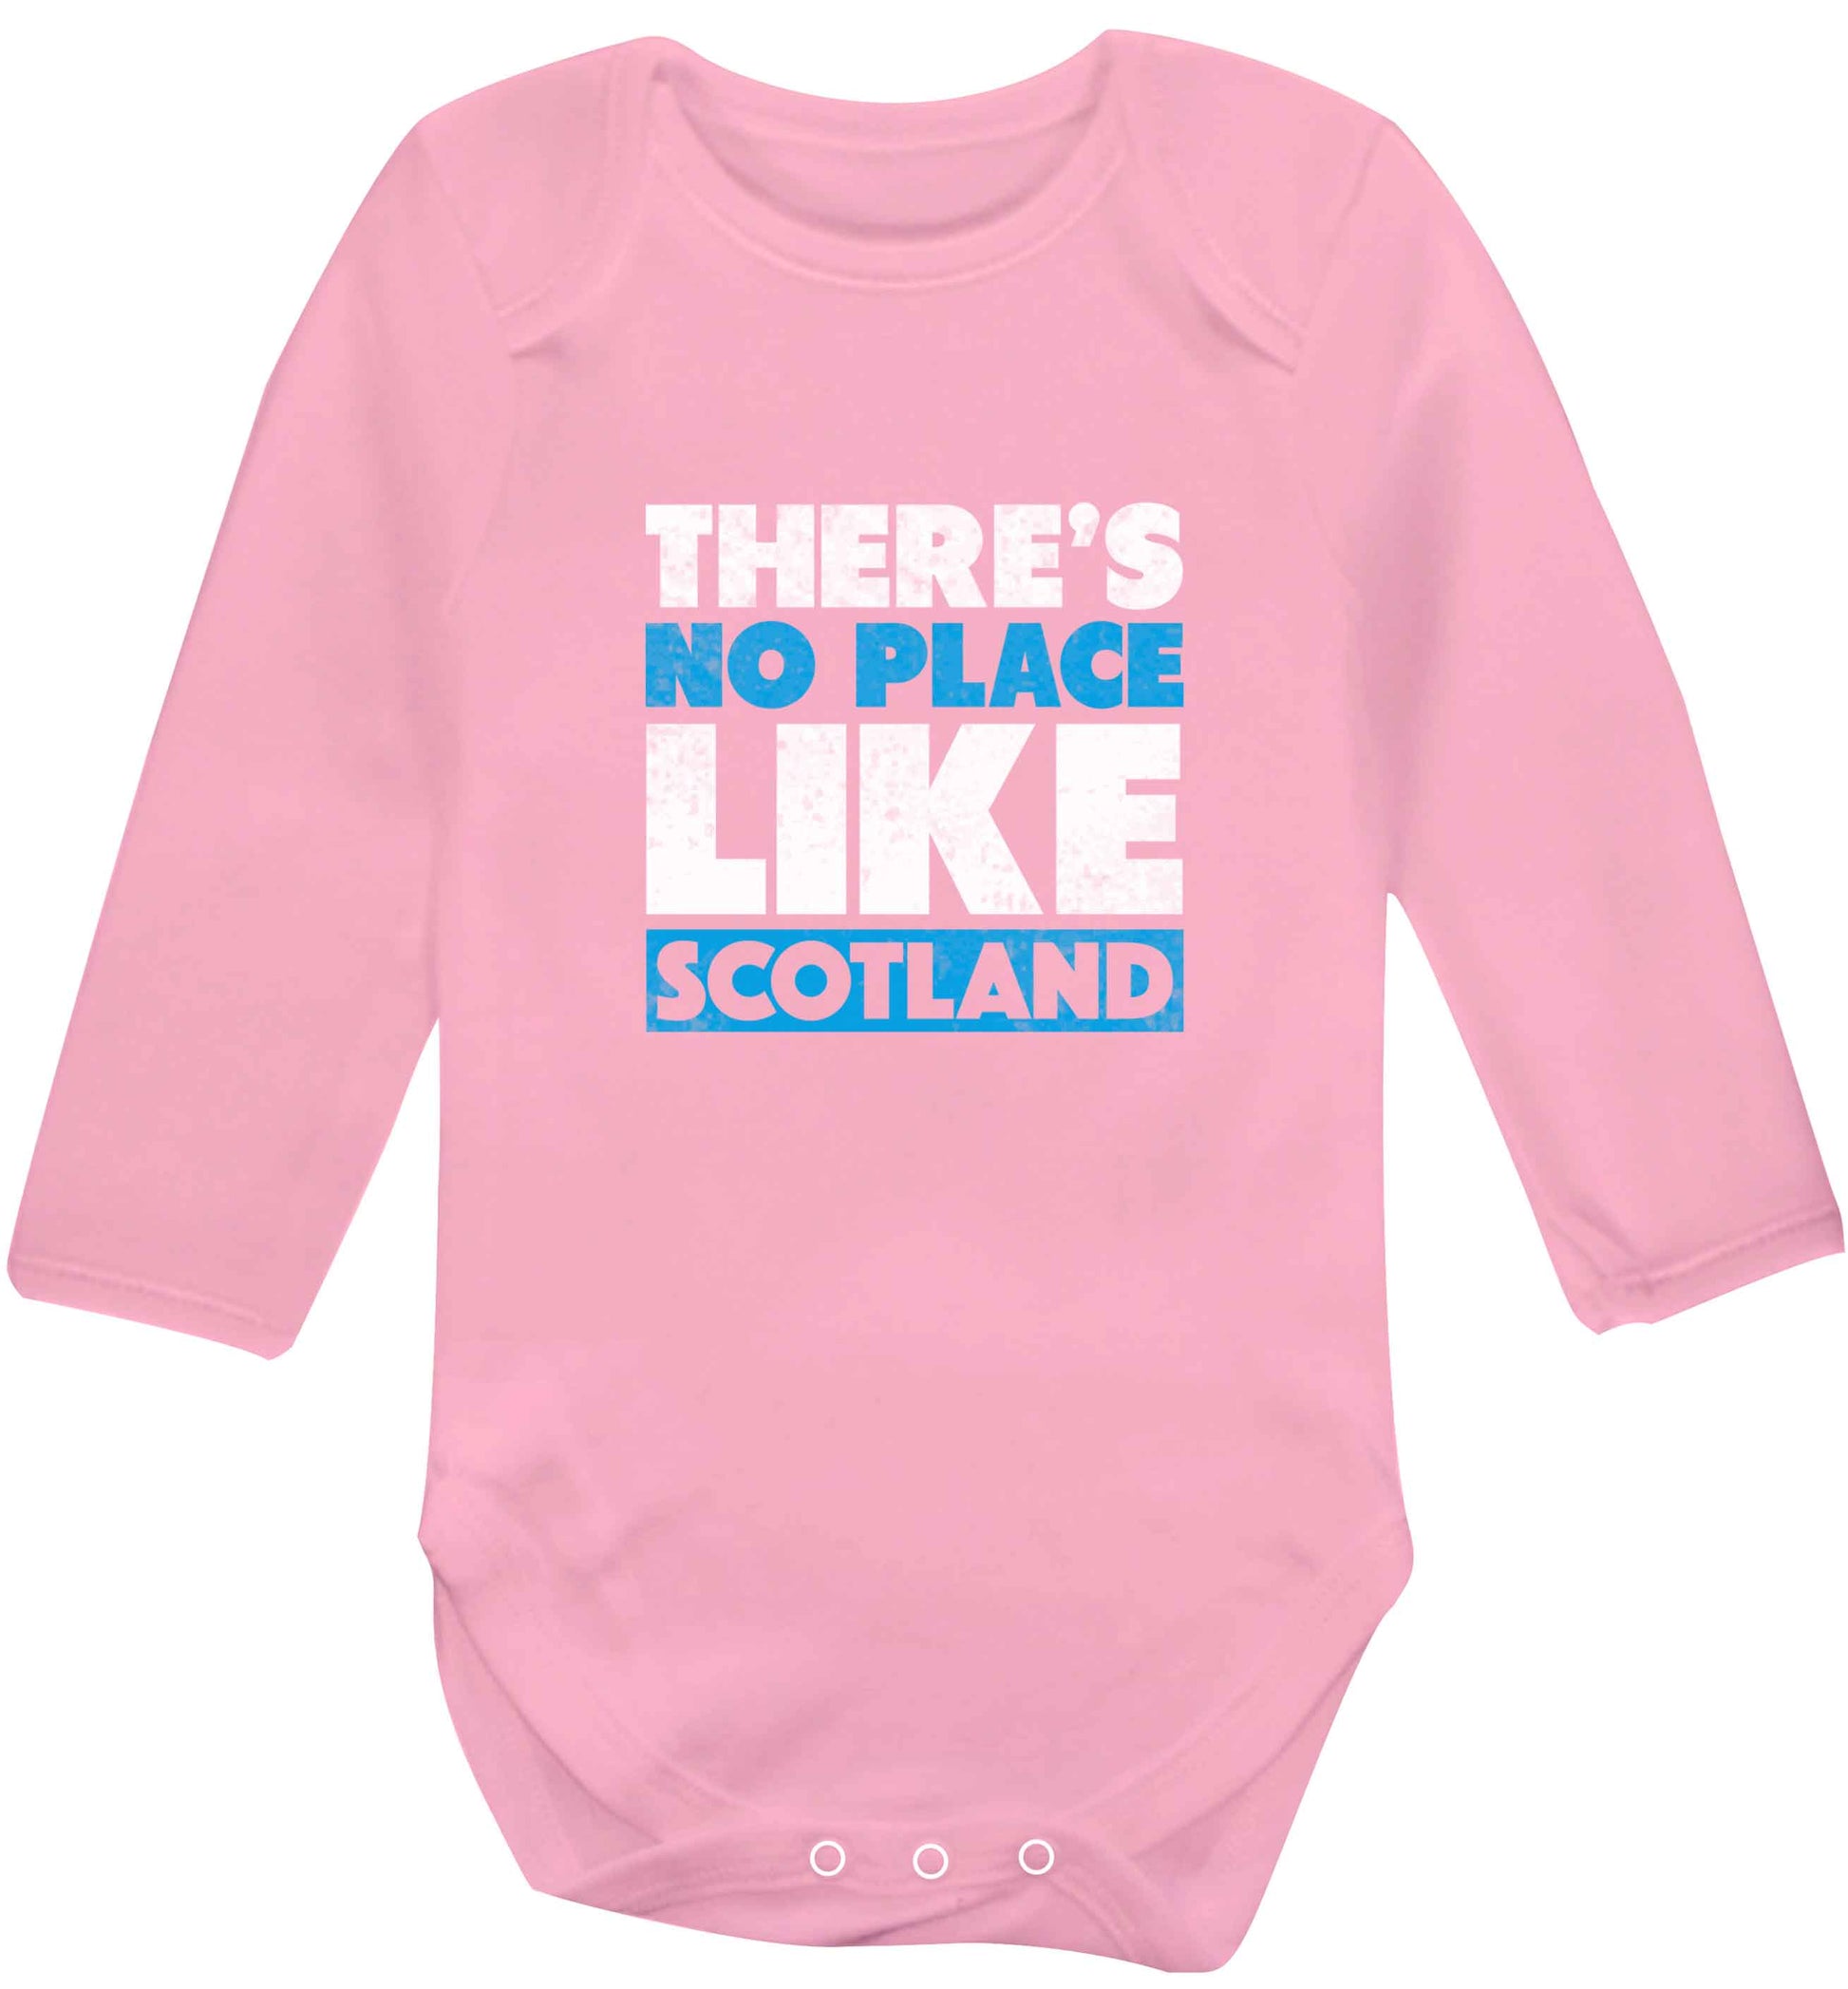 There's no place like Scotland baby vest long sleeved pale pink 6-12 months